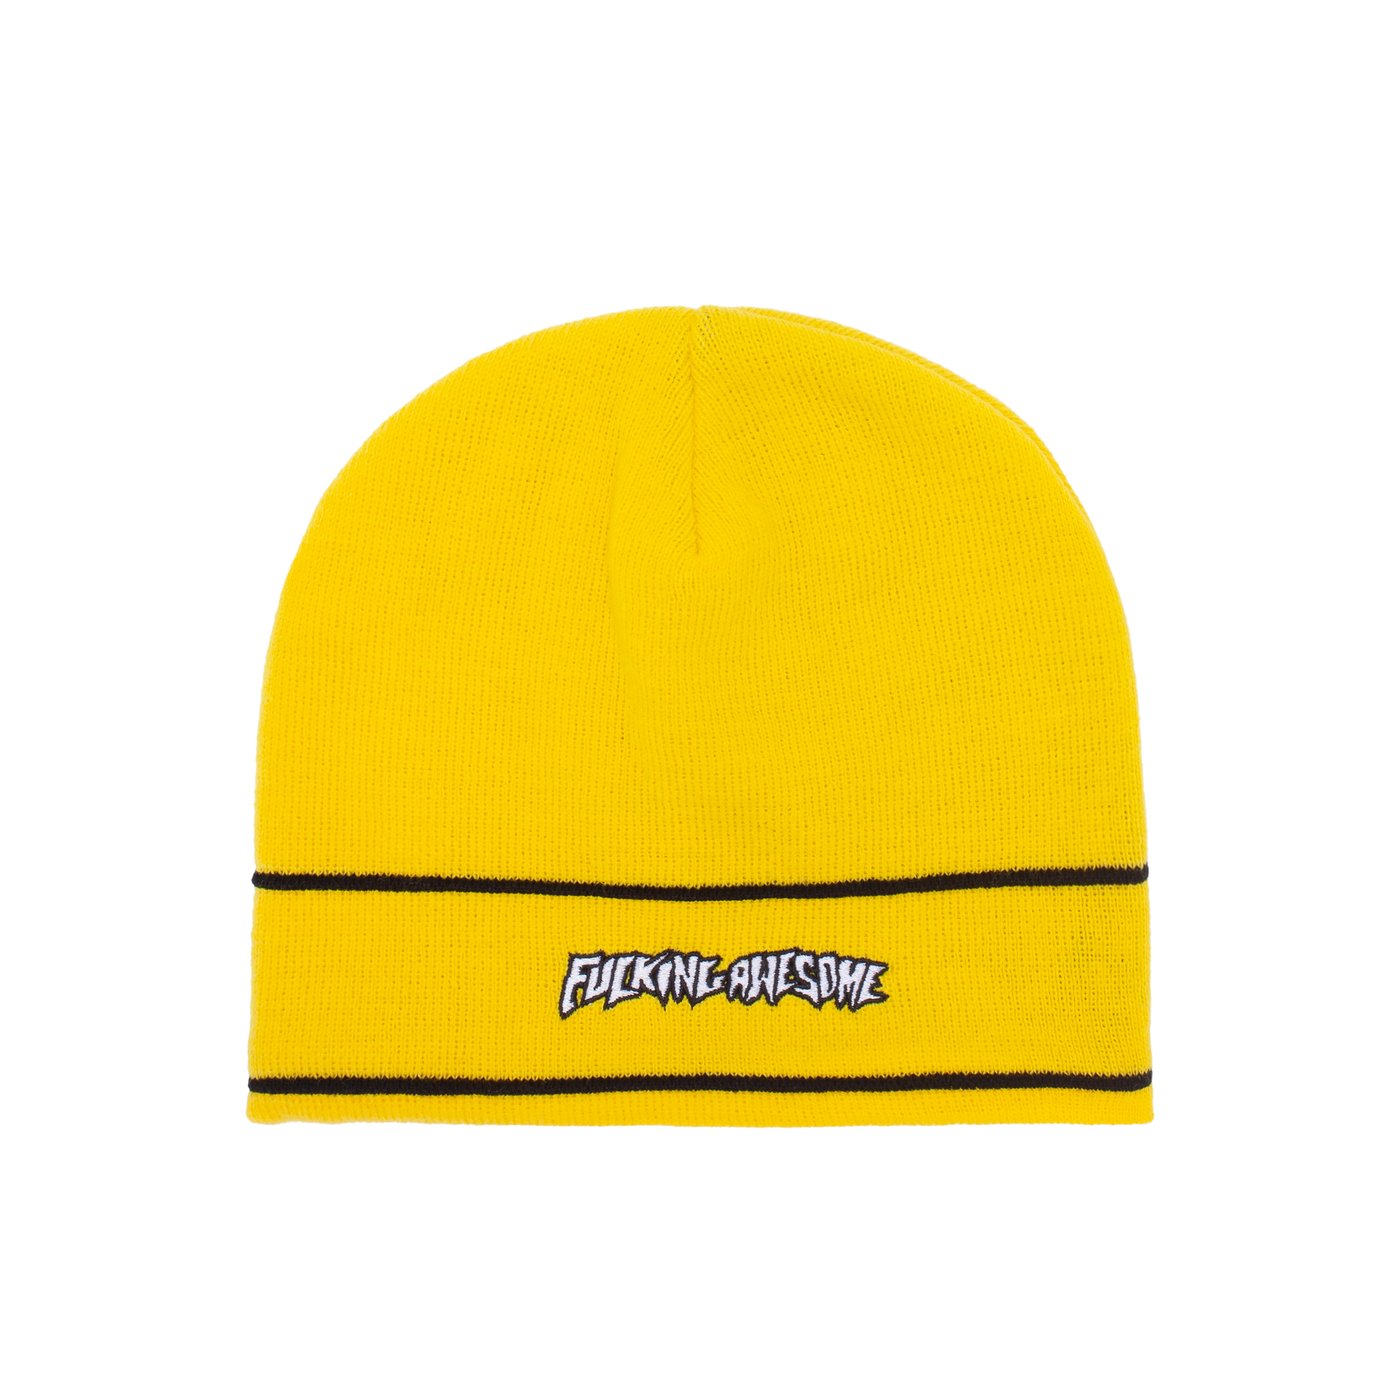 FUCKING AWESOME LITTLE STAMP BEANIE - YELLOW BLACK